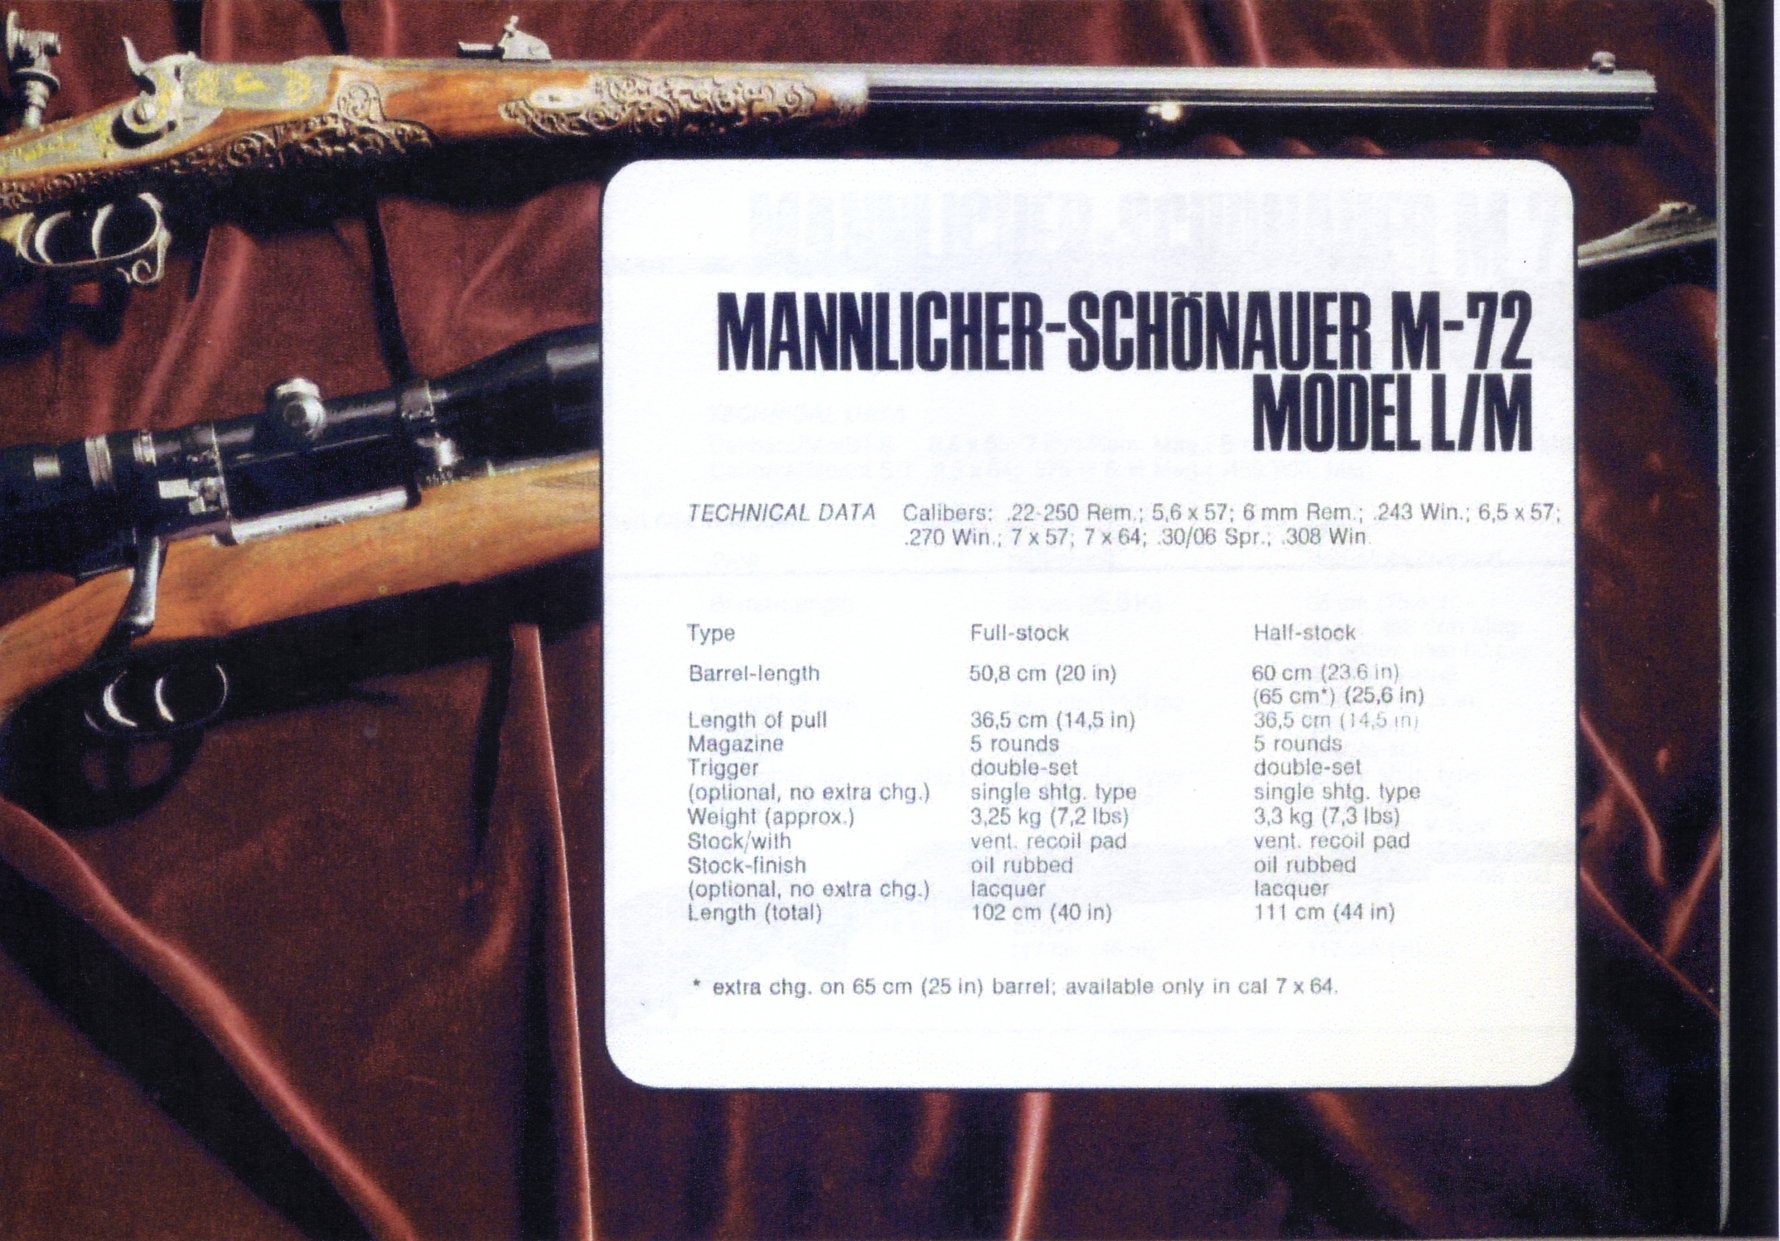 The Mannlicher-Schönauer M72 Model L/M specifcations and caliber options. (Picture from the original Steyr catalog and courtesy of Steyr.)